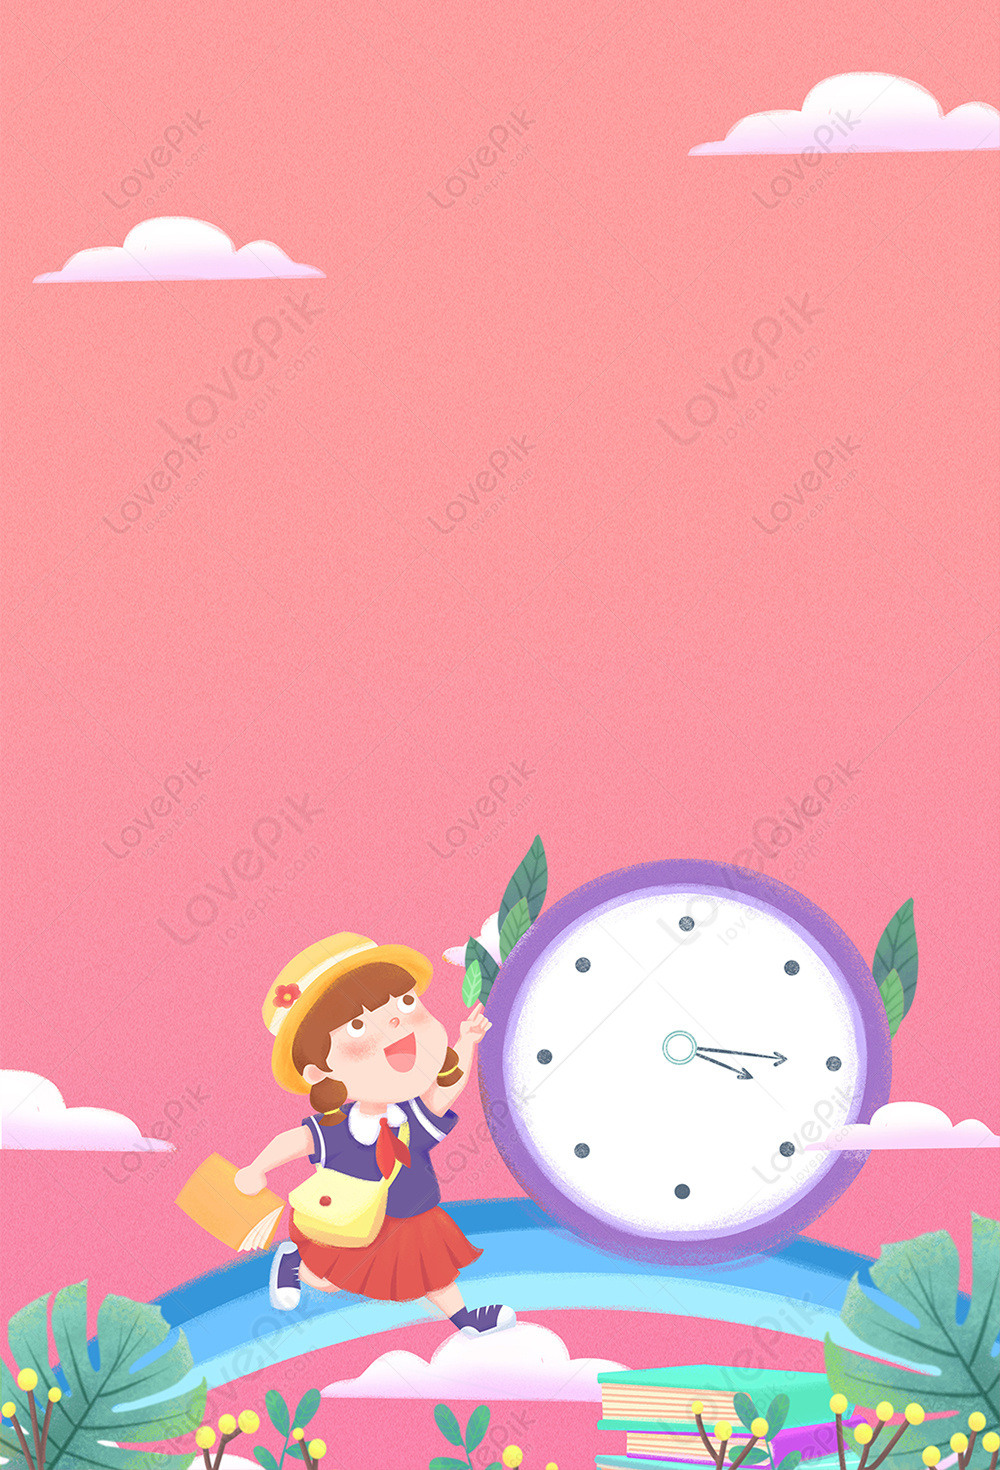 School Poster Background Download Free | Poster Background Image on Lovepik  | 401599975